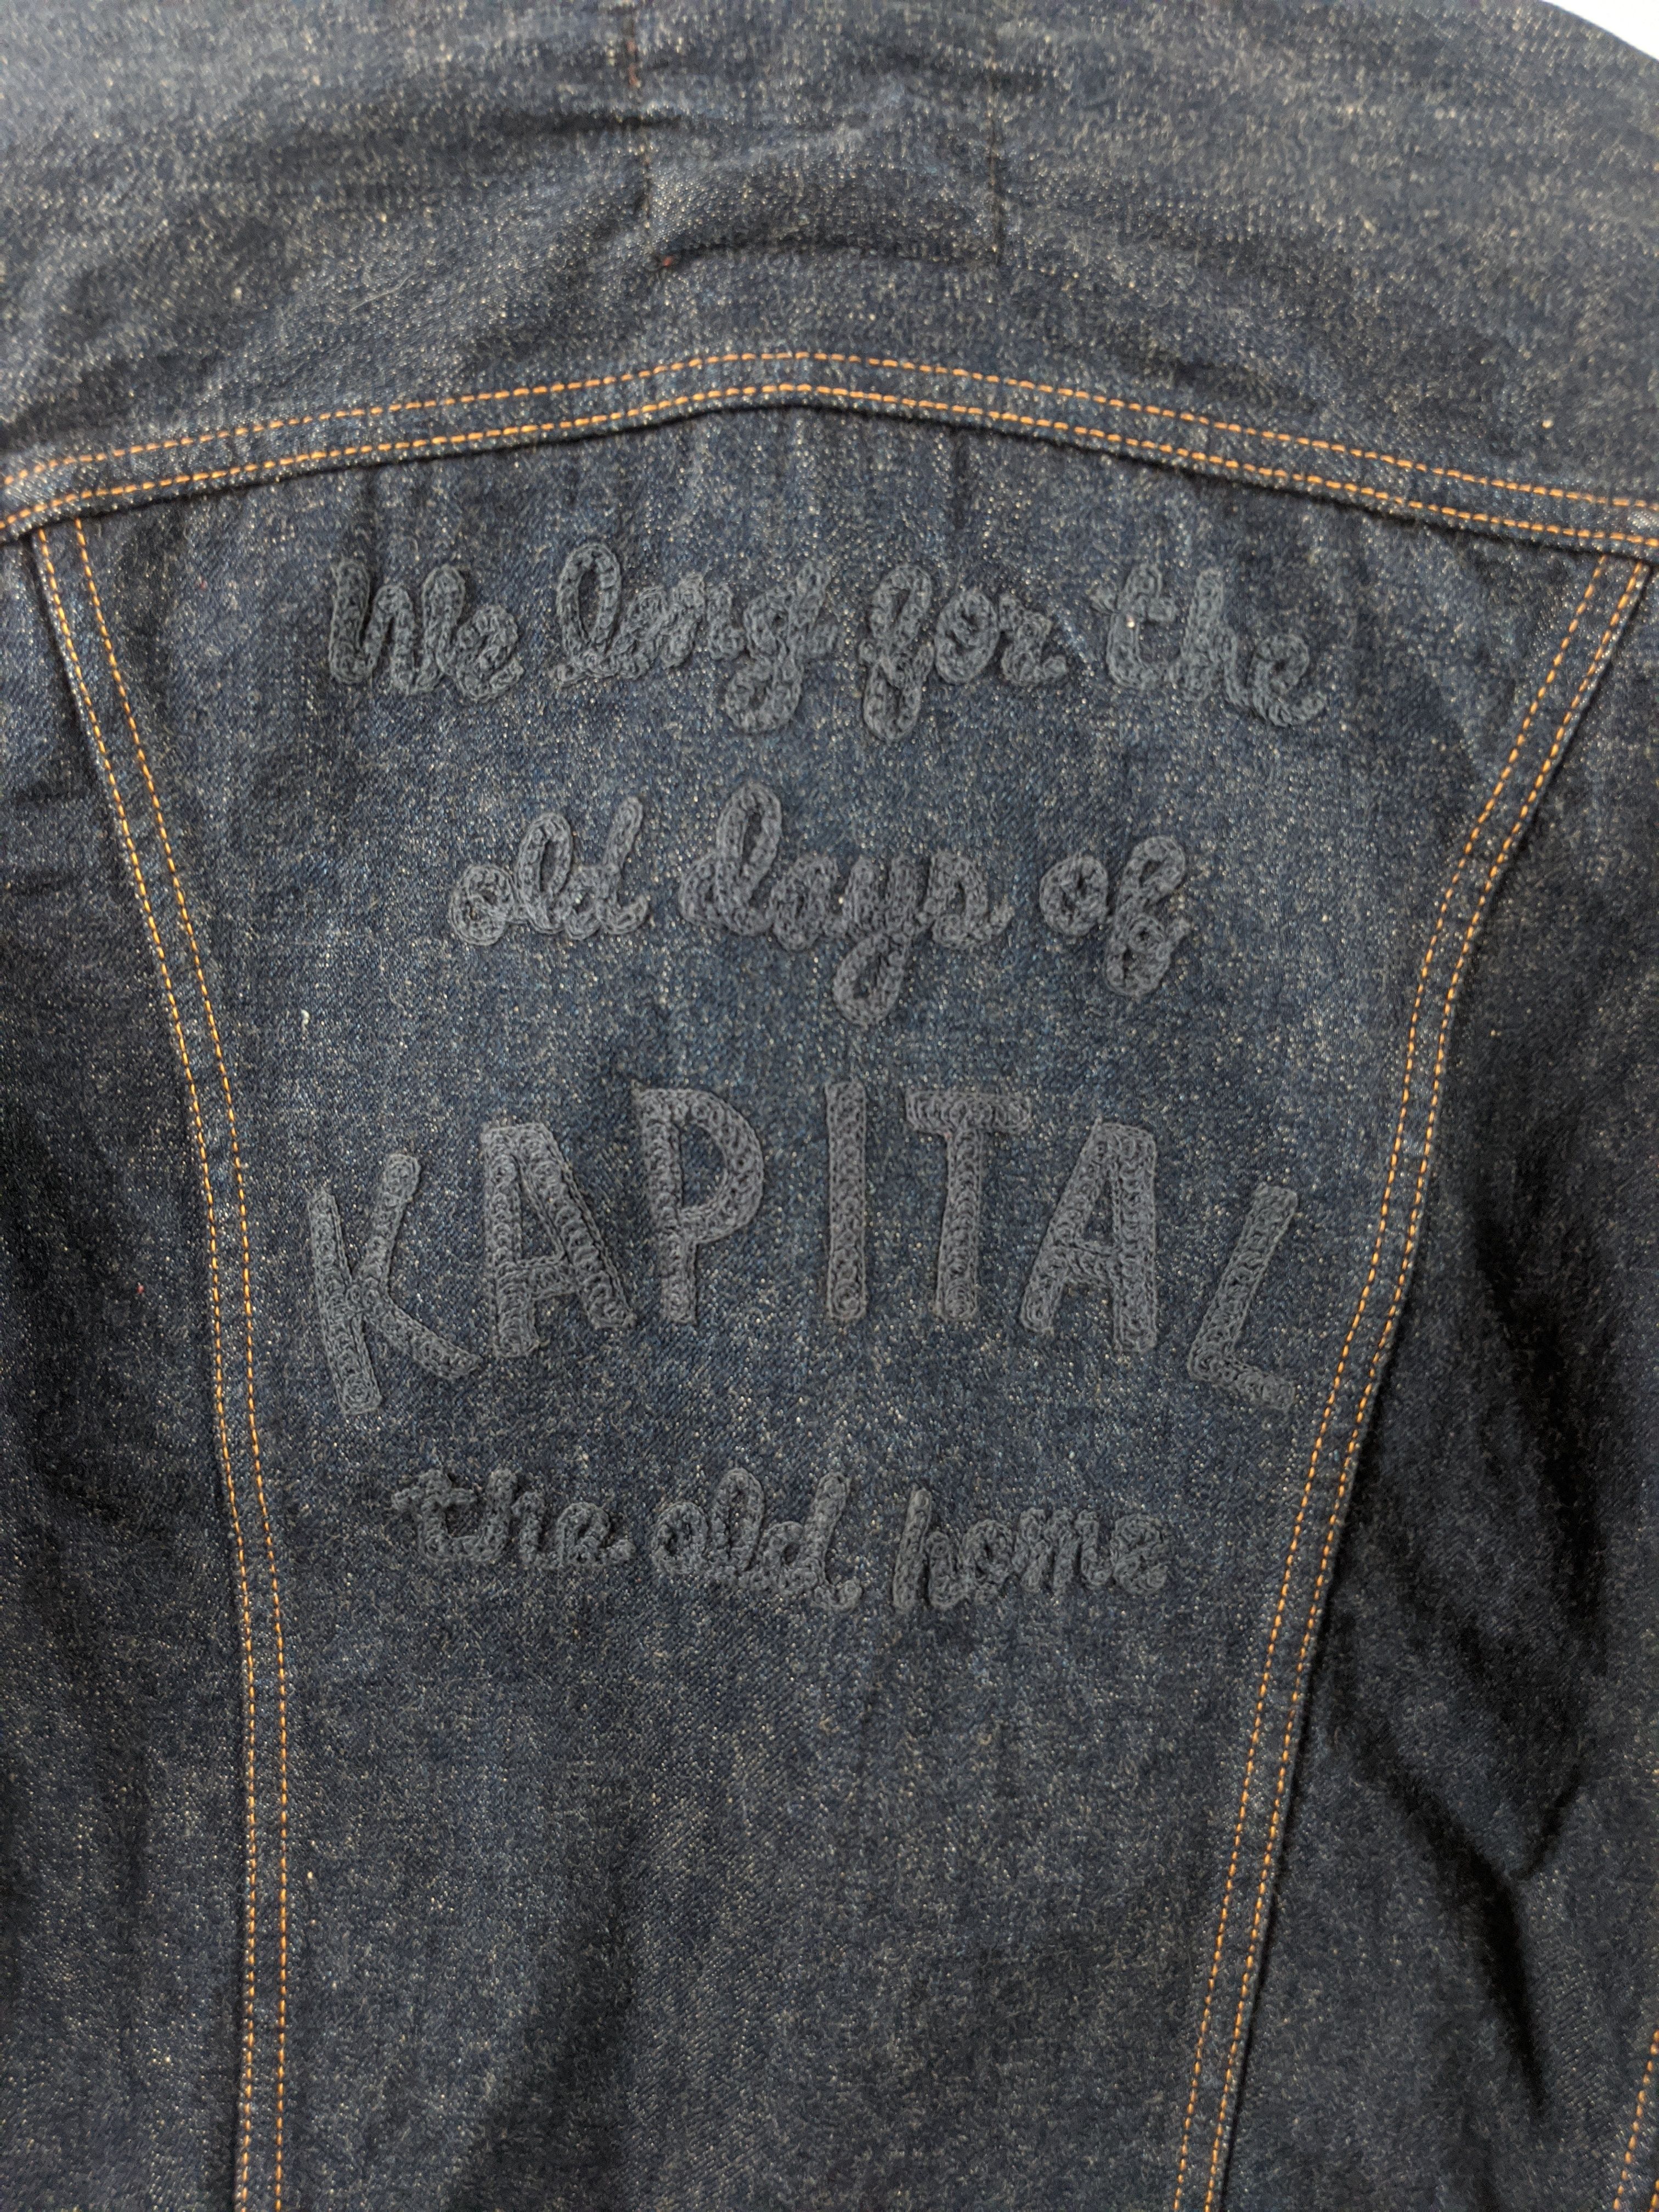 Denime Hysteric Kapital Buttonfly Jeans Jacket - 3